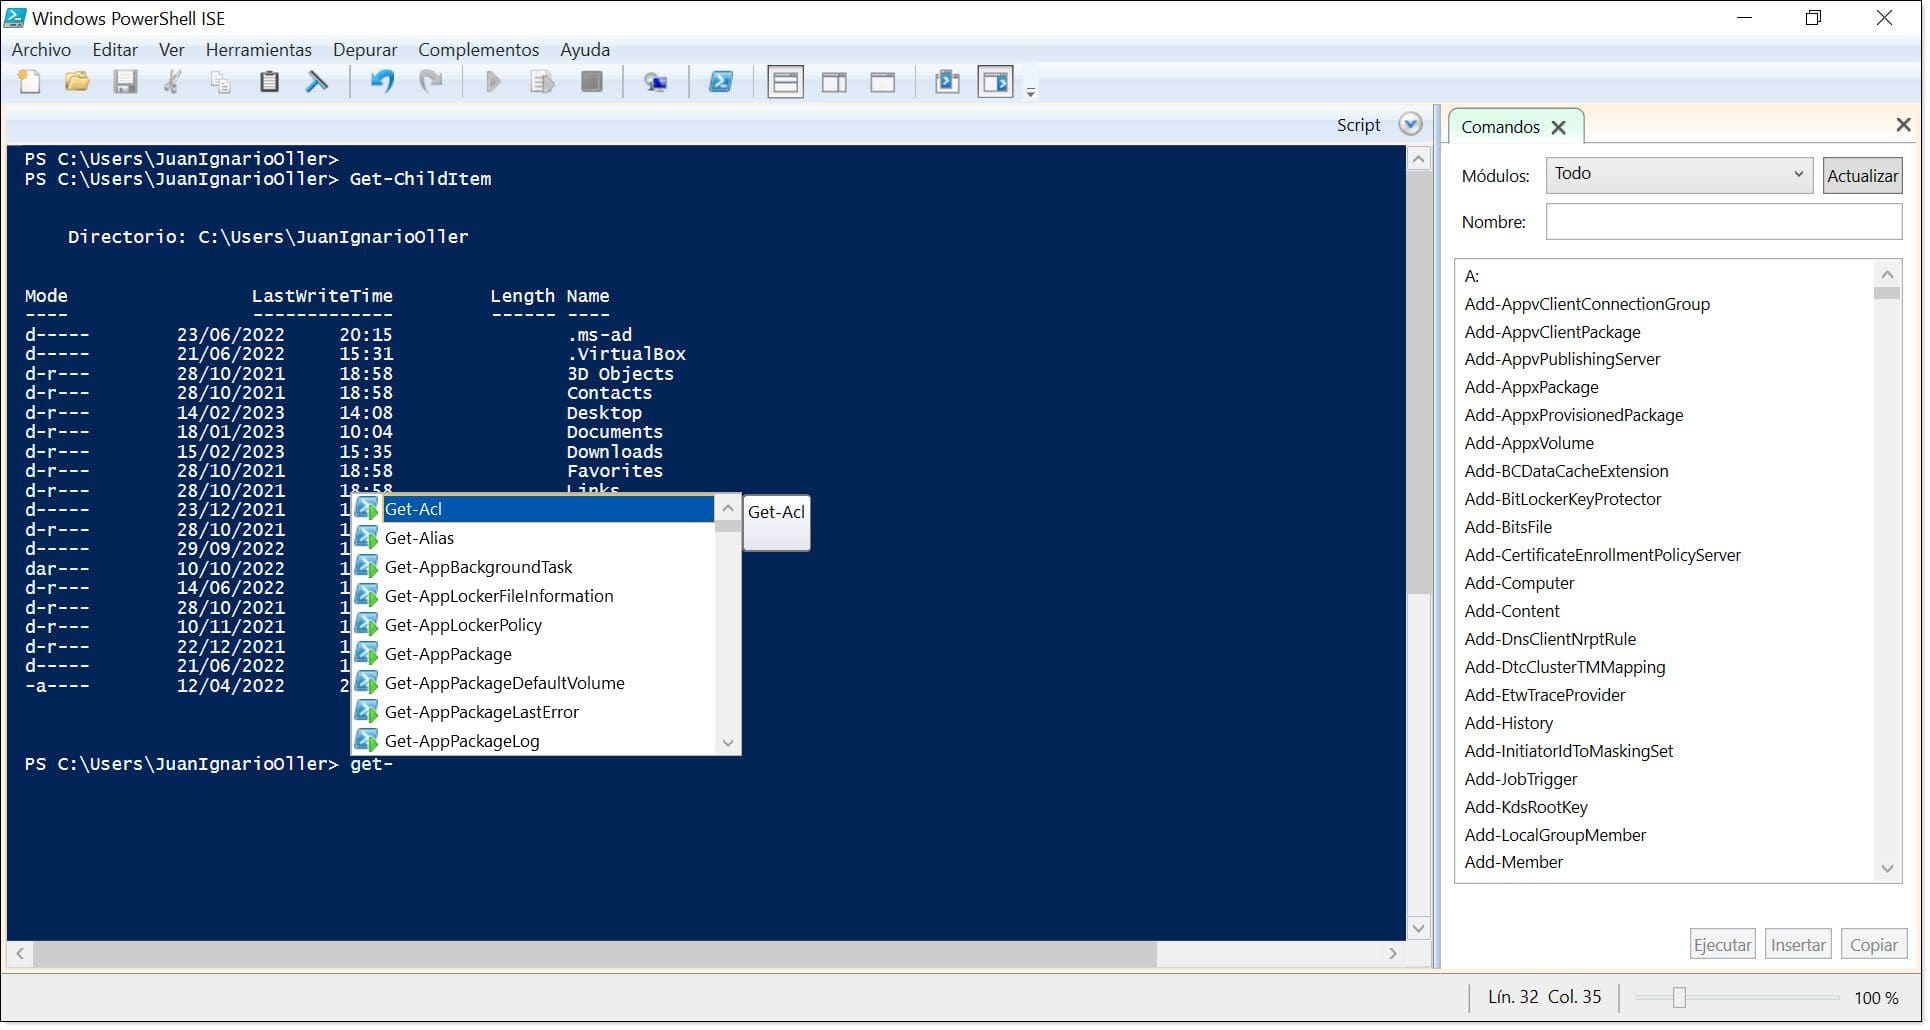 Image - Example of autocomplete in PowerShell ISE